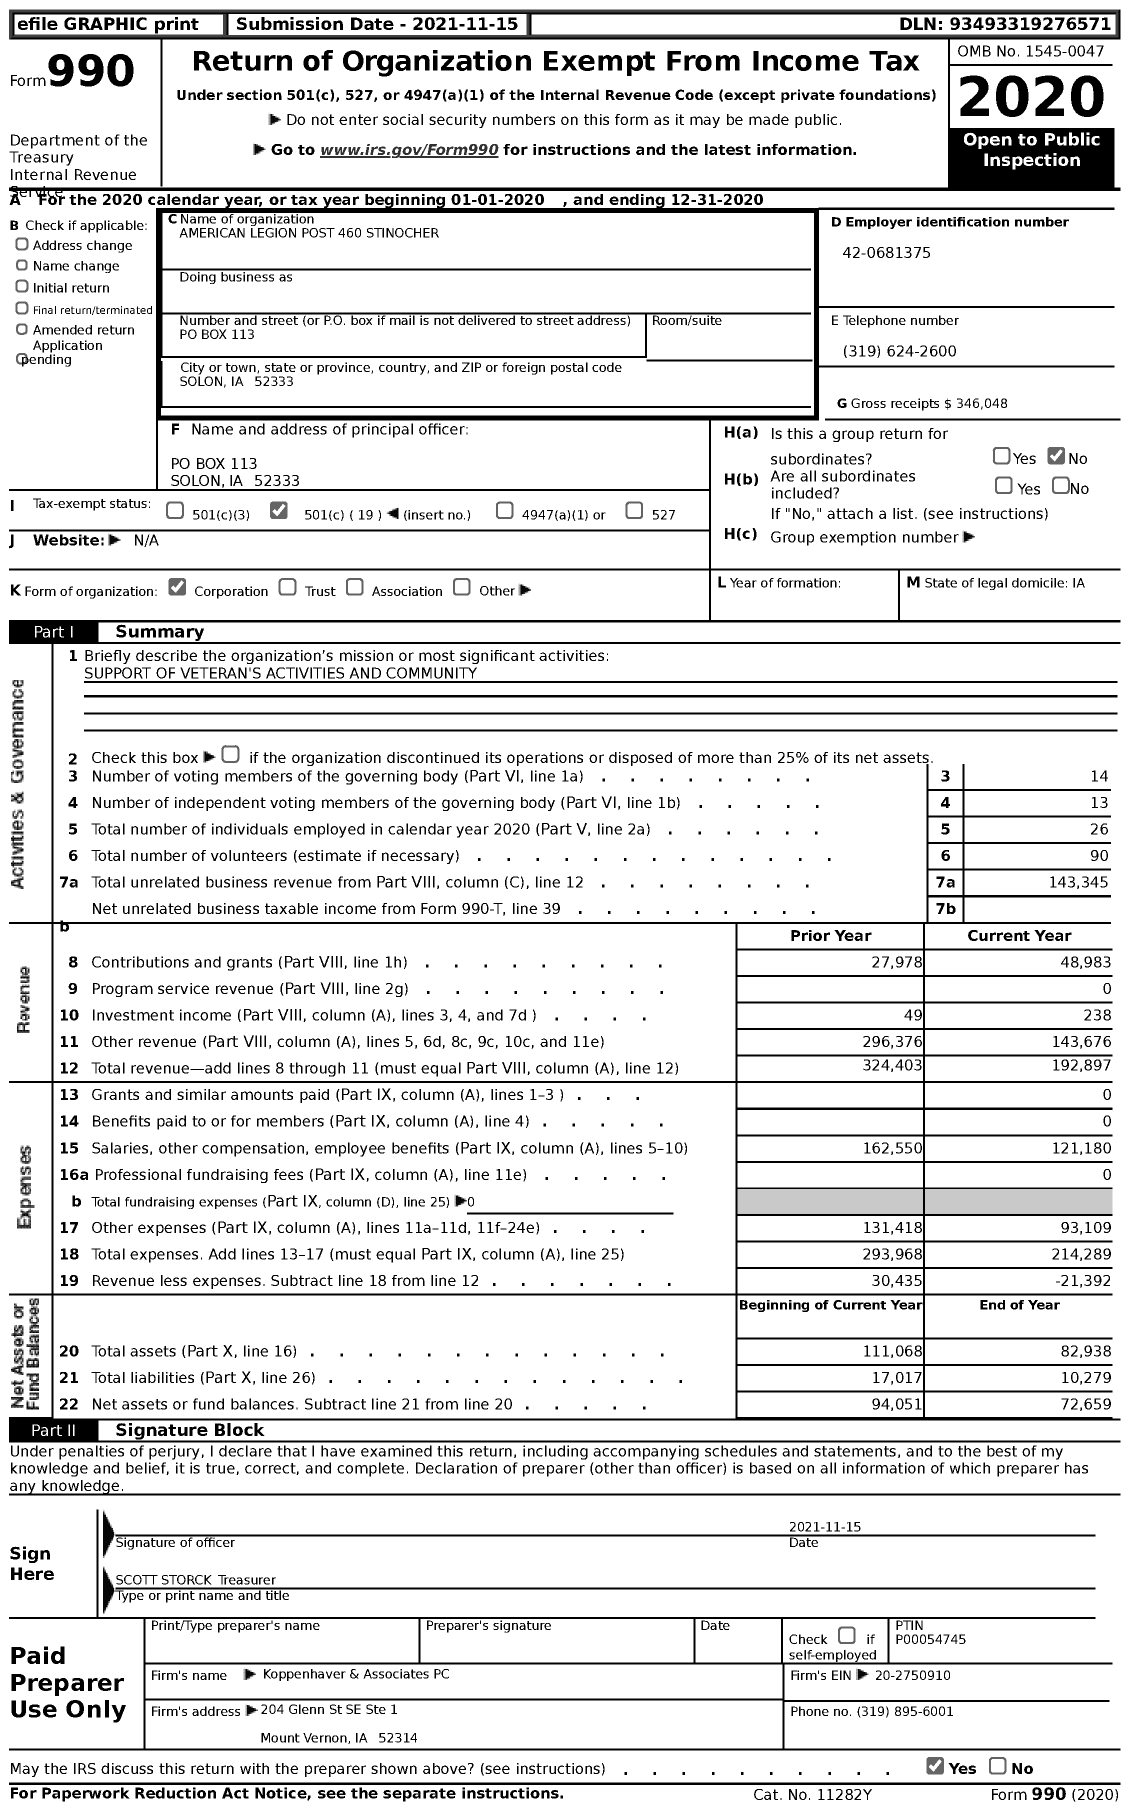 Image of first page of 2020 Form 990 for American Legion - 0460 Stinocher